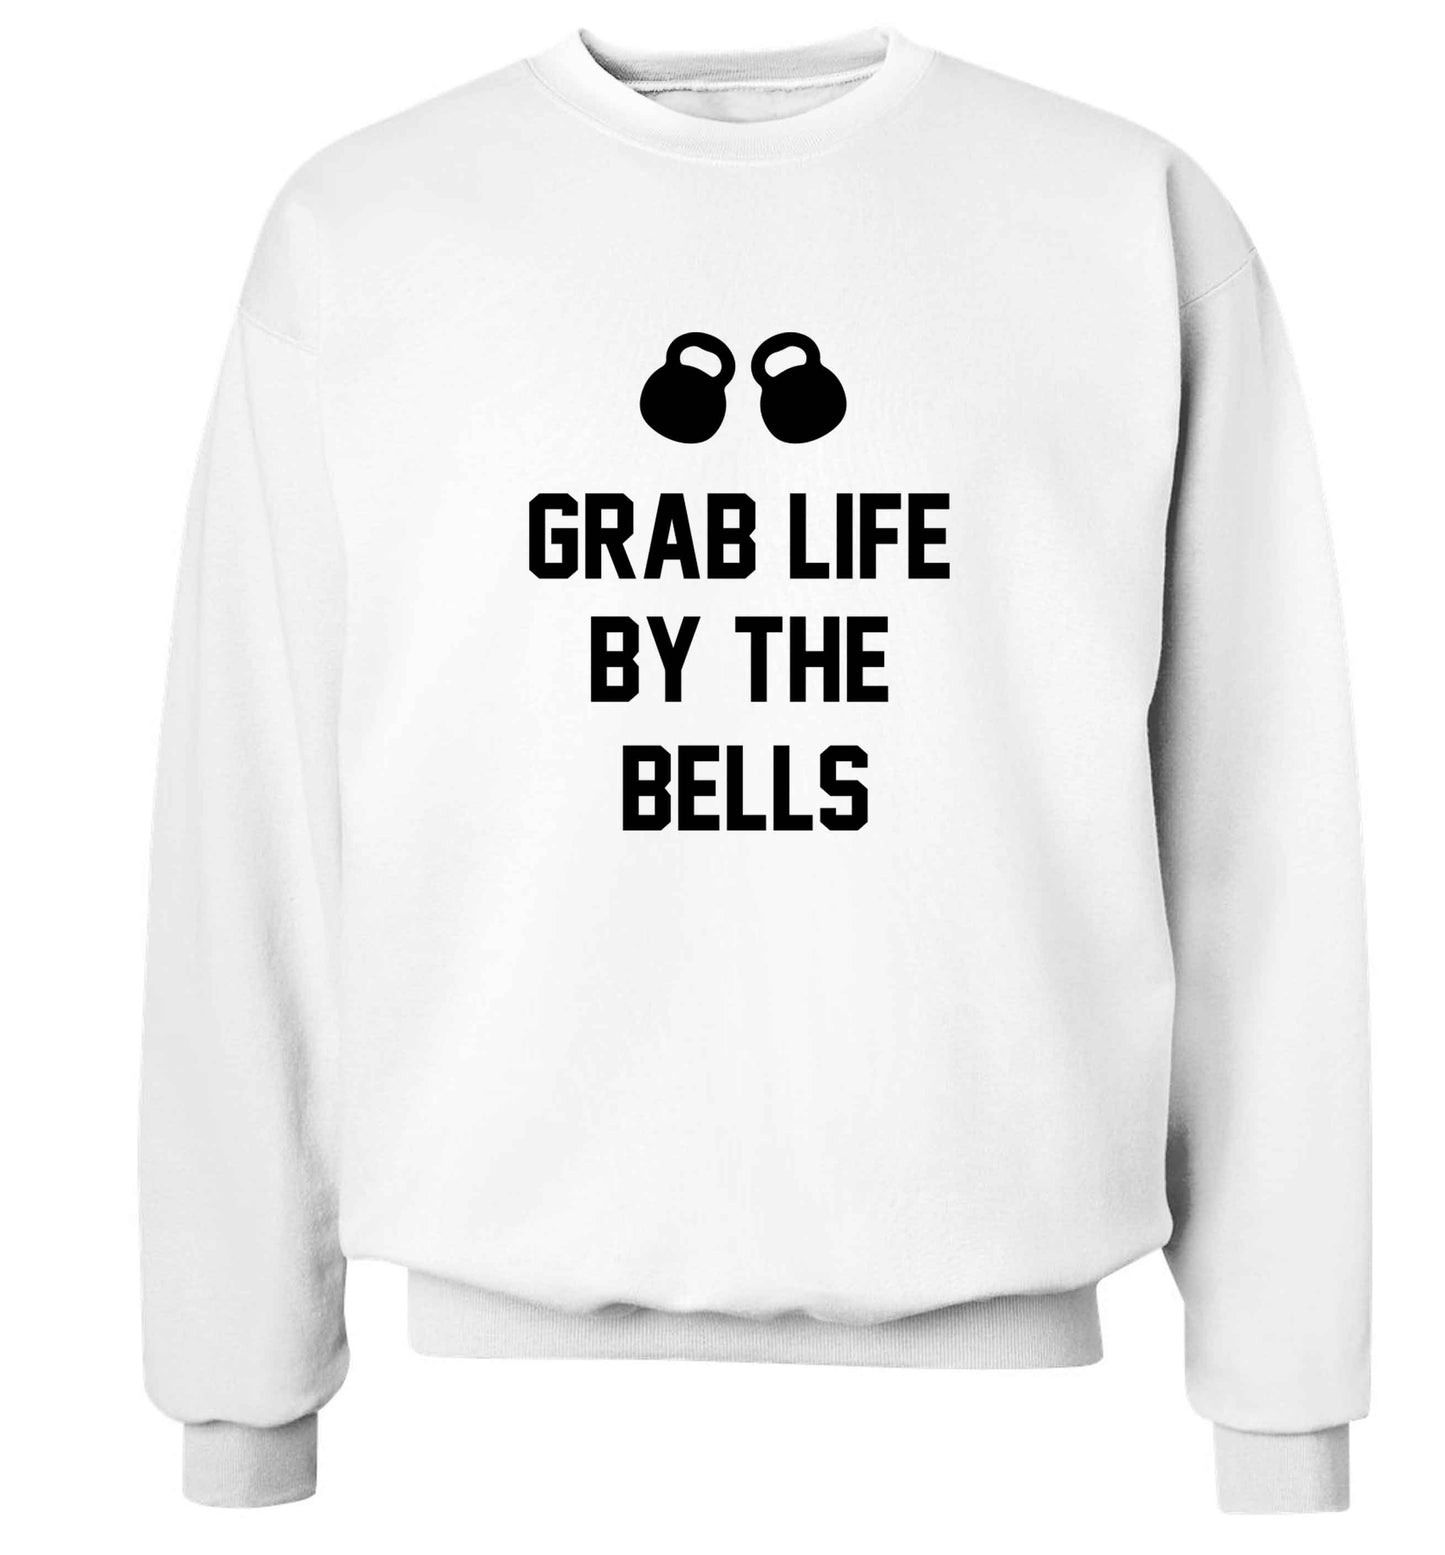 Grab life by the bells adult's unisex white sweater 2XL